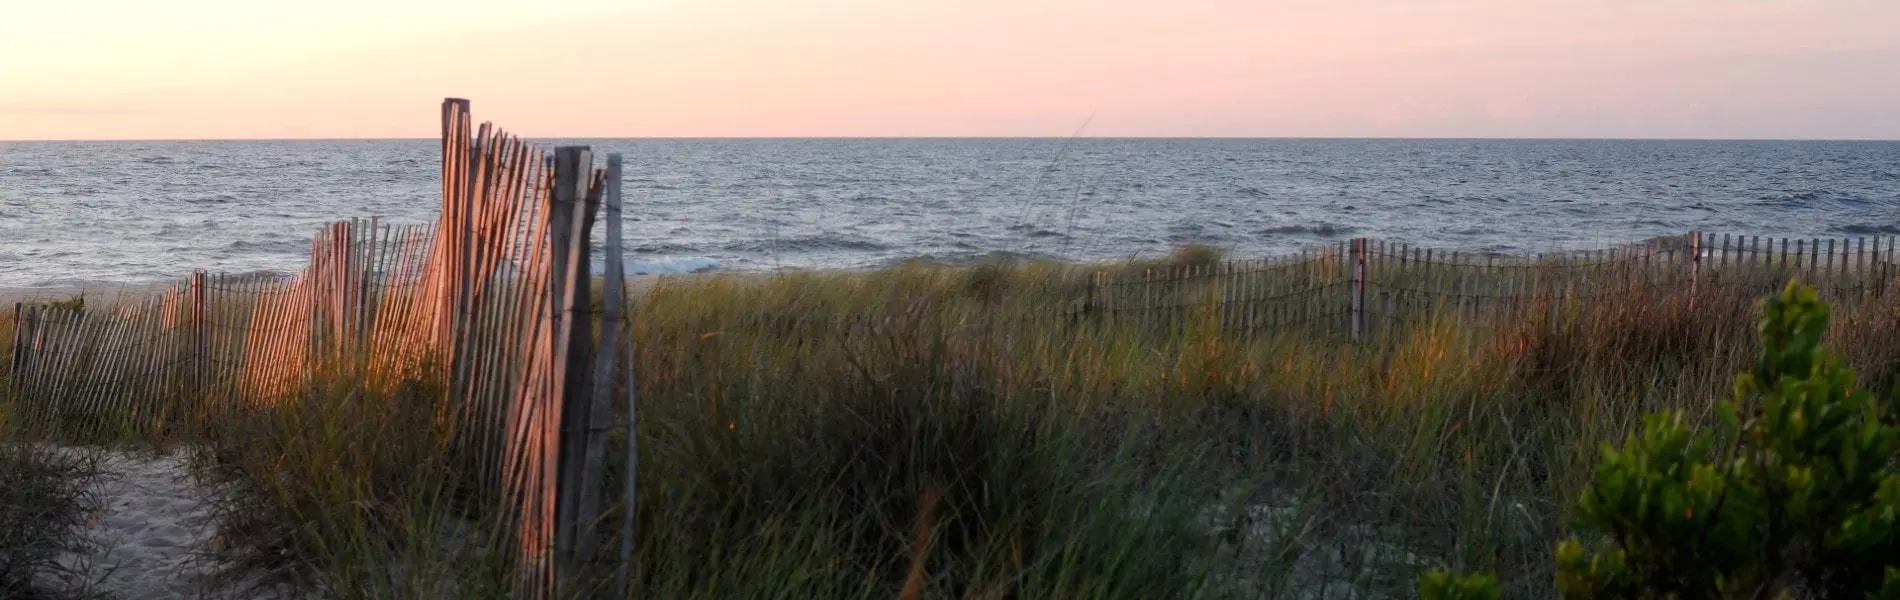 pathway to the beach, South Bethany, Delaware